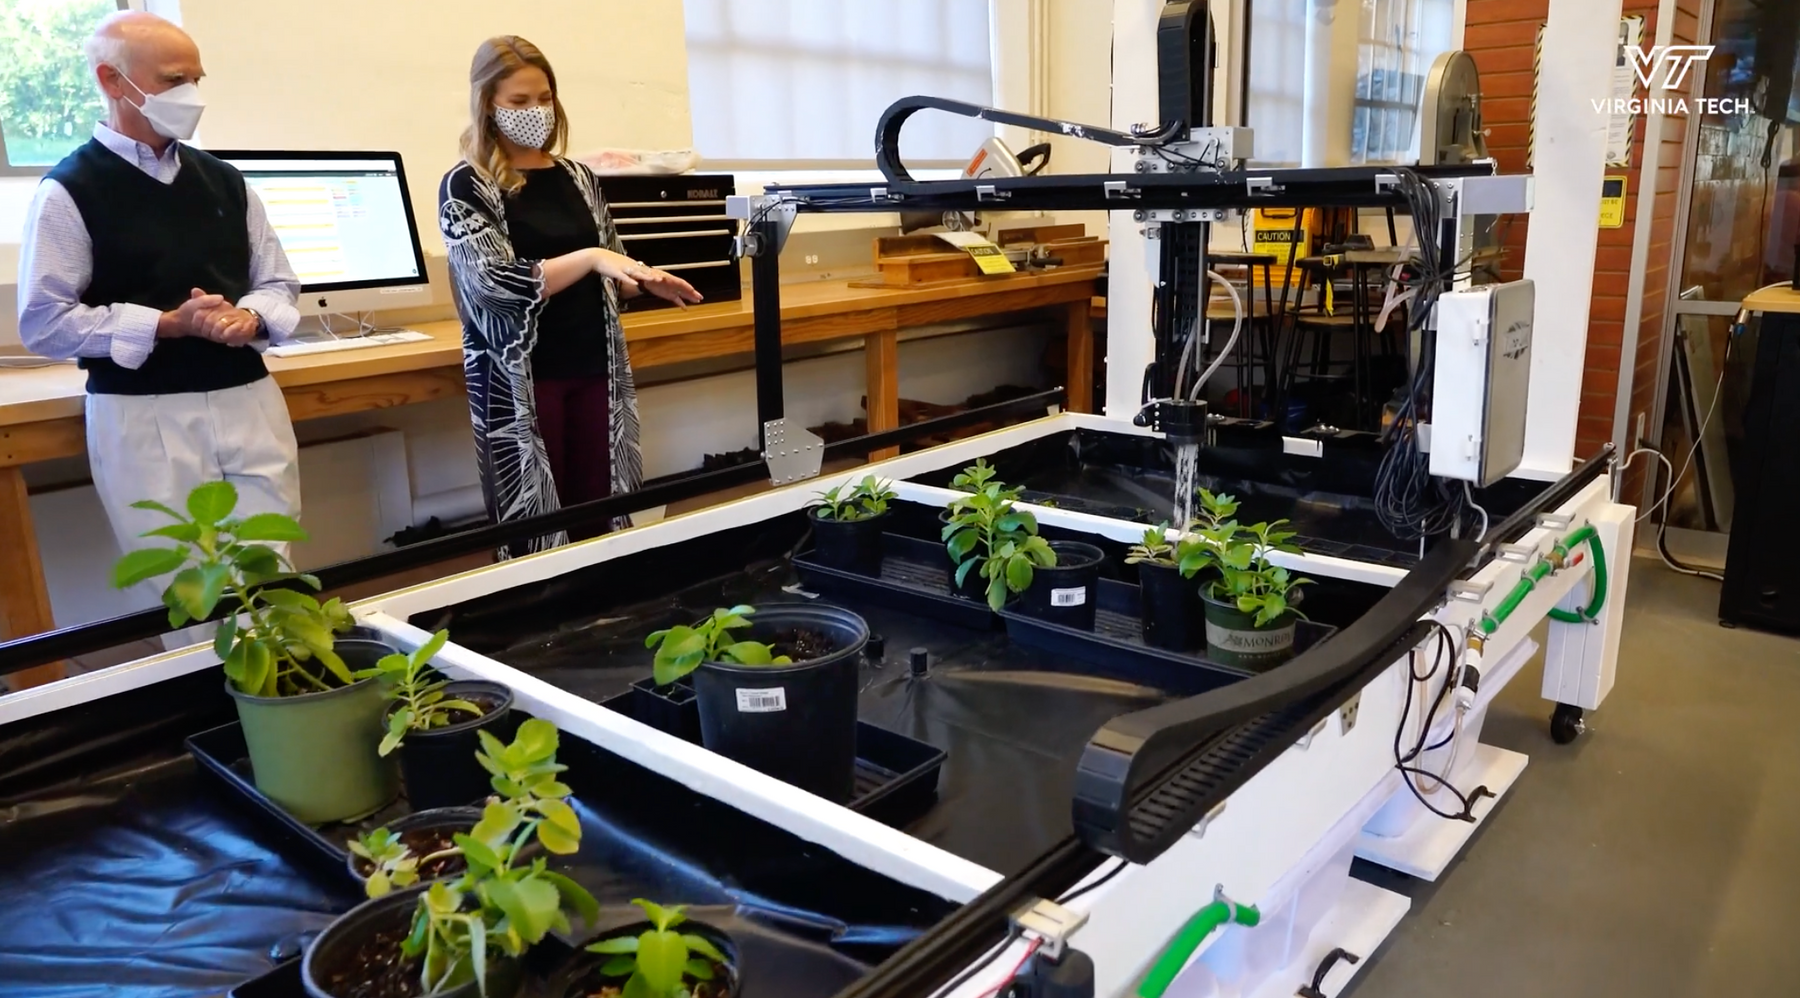 Virginia Tech professor helps middle schoolers develop hands-on skills with FarmBot